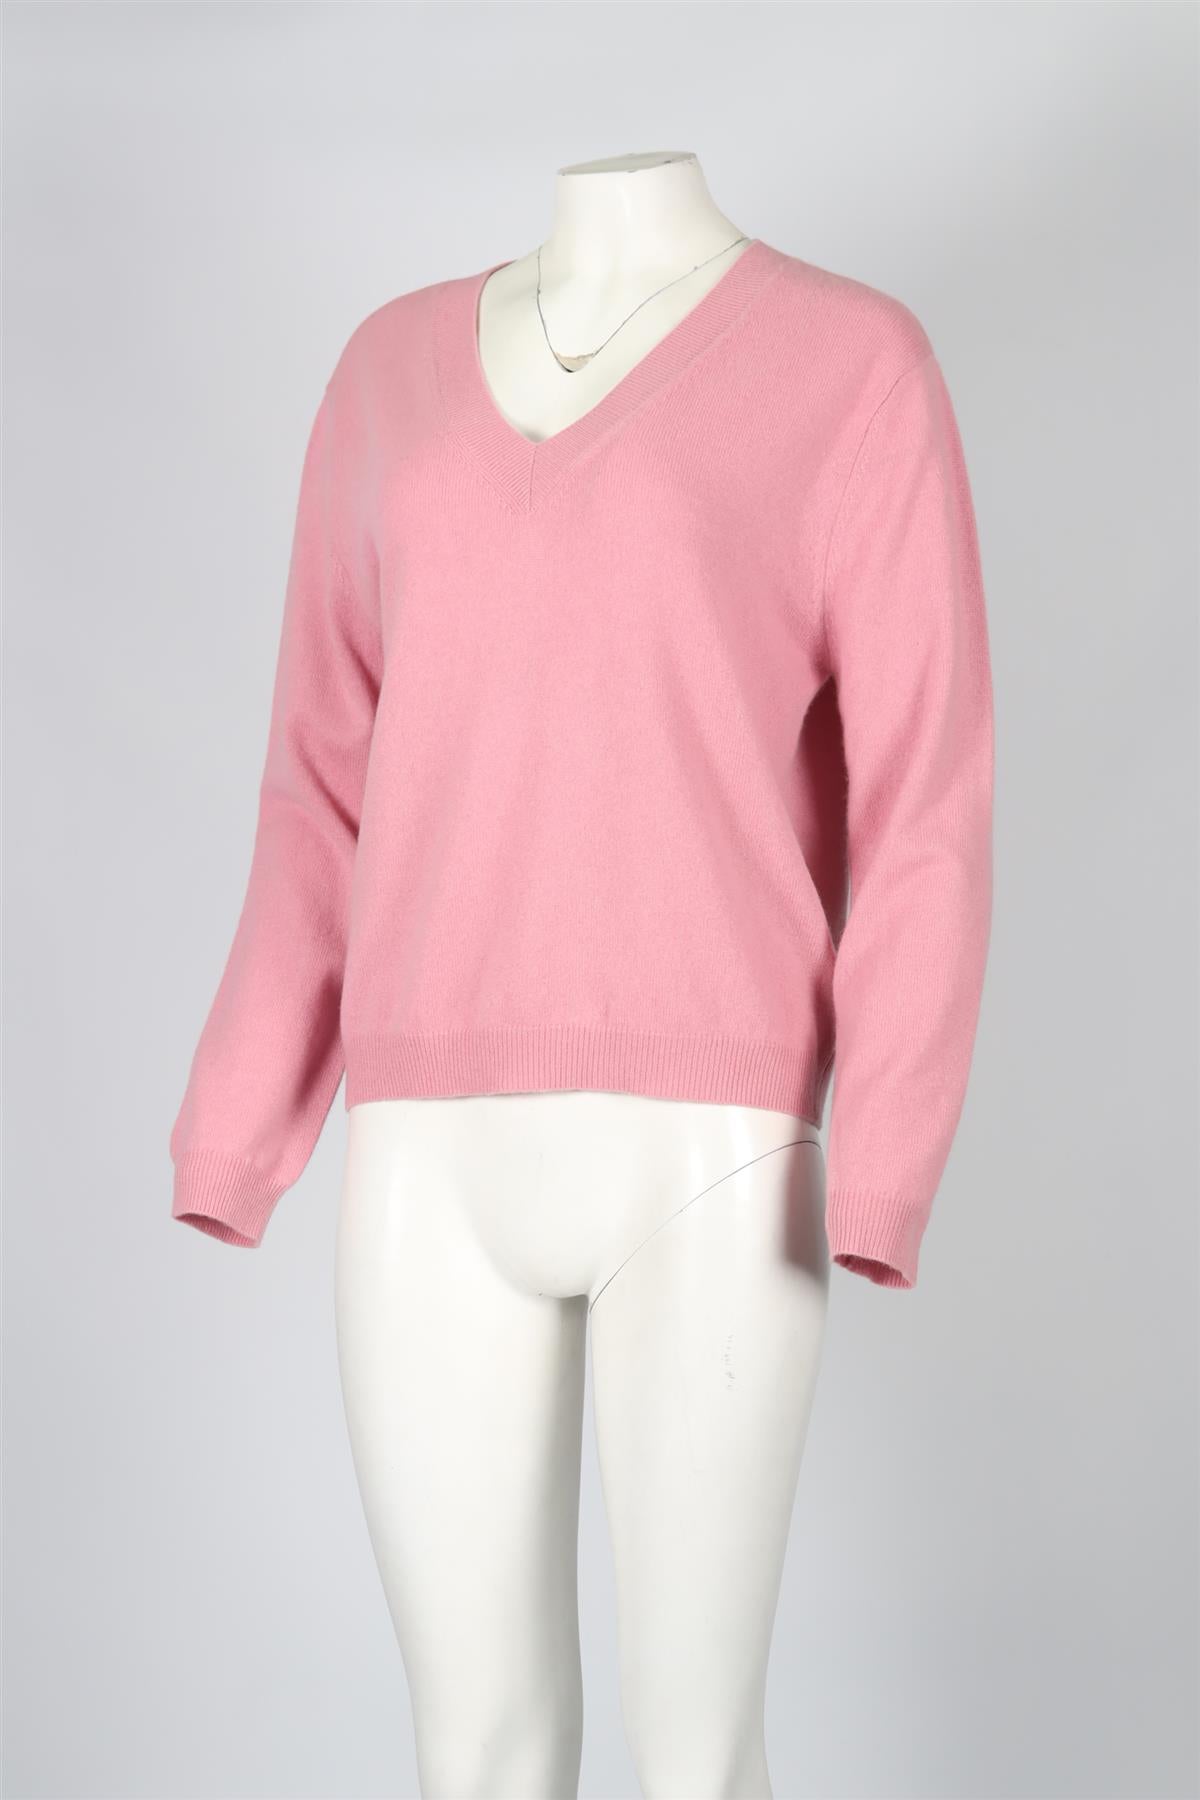 PEOPLE'S REPUBLIC OF CASHMERE CASHMERE SWEATER SMALL